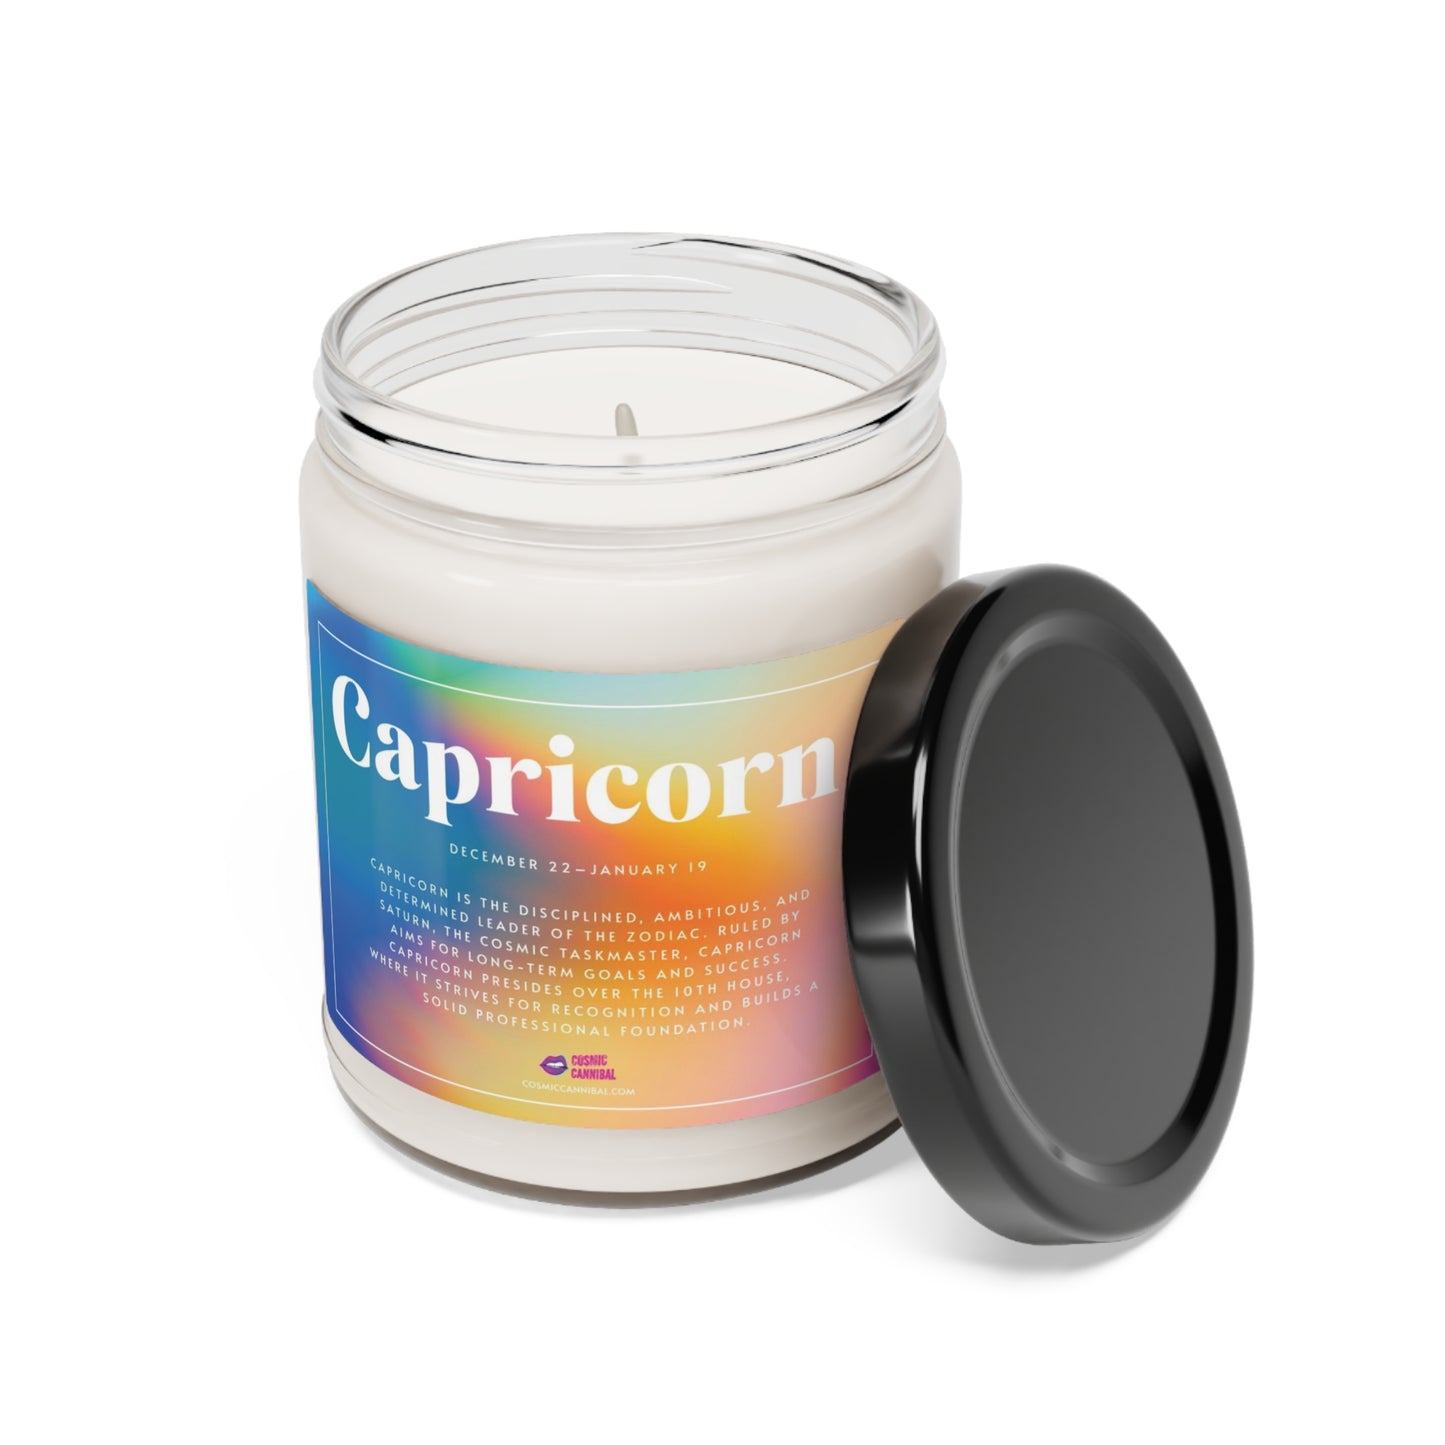 The Capricorn Candle